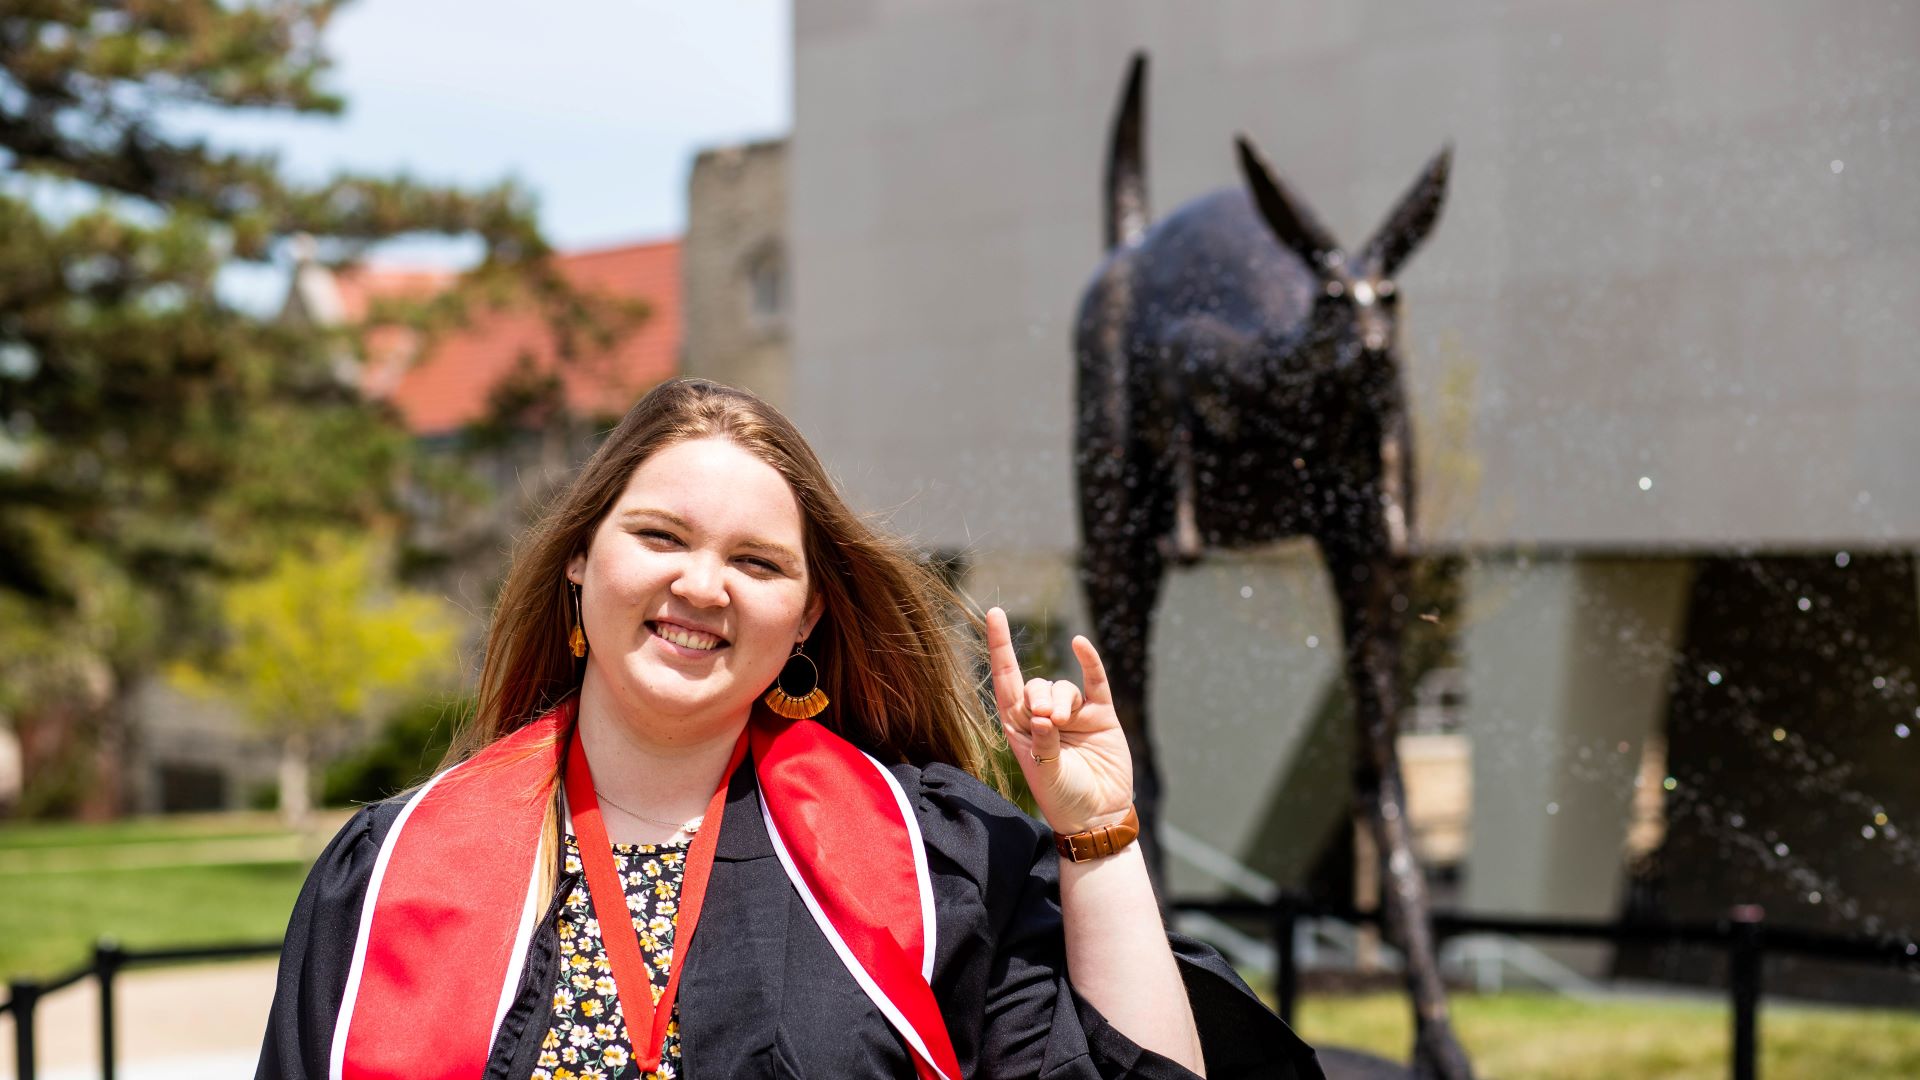 student wearing graduation gown makes the roo up gesture with her hand while posing in front of the Corbin roo statue